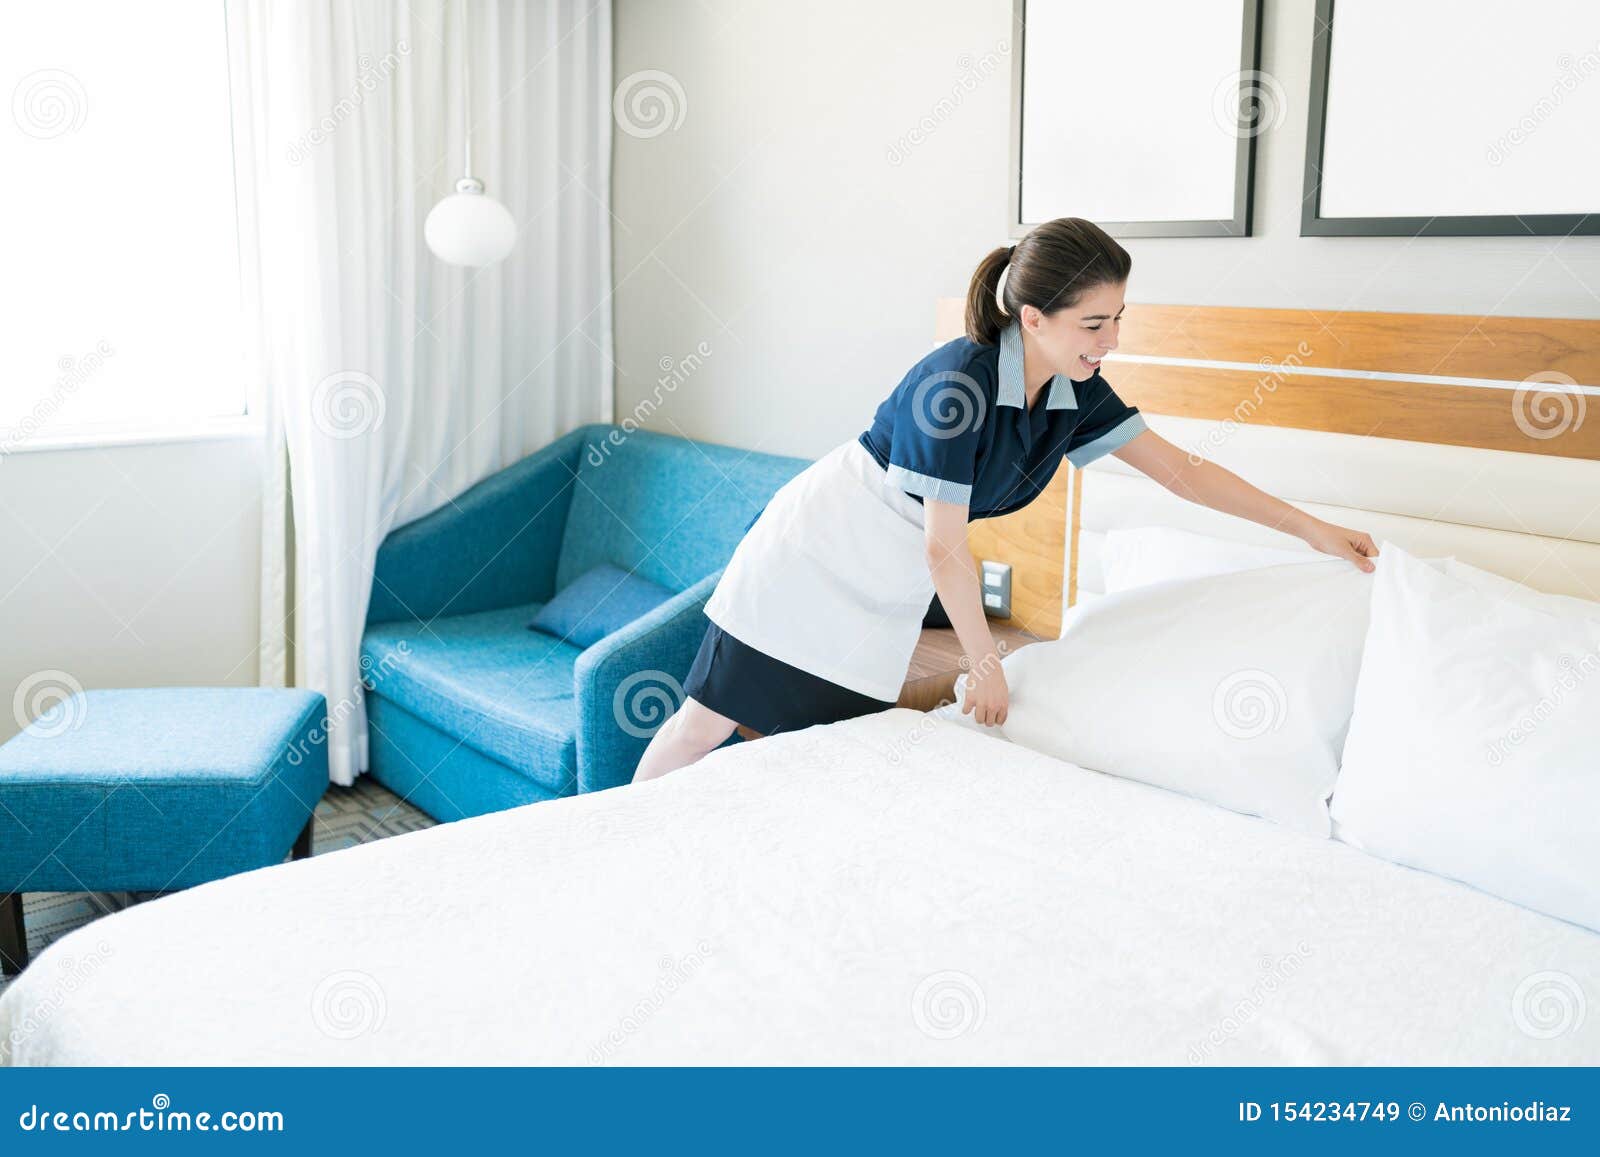 Smiling Maid Cleaning Hotel Room Stock Image Image Of Bedding Occupation 154234749